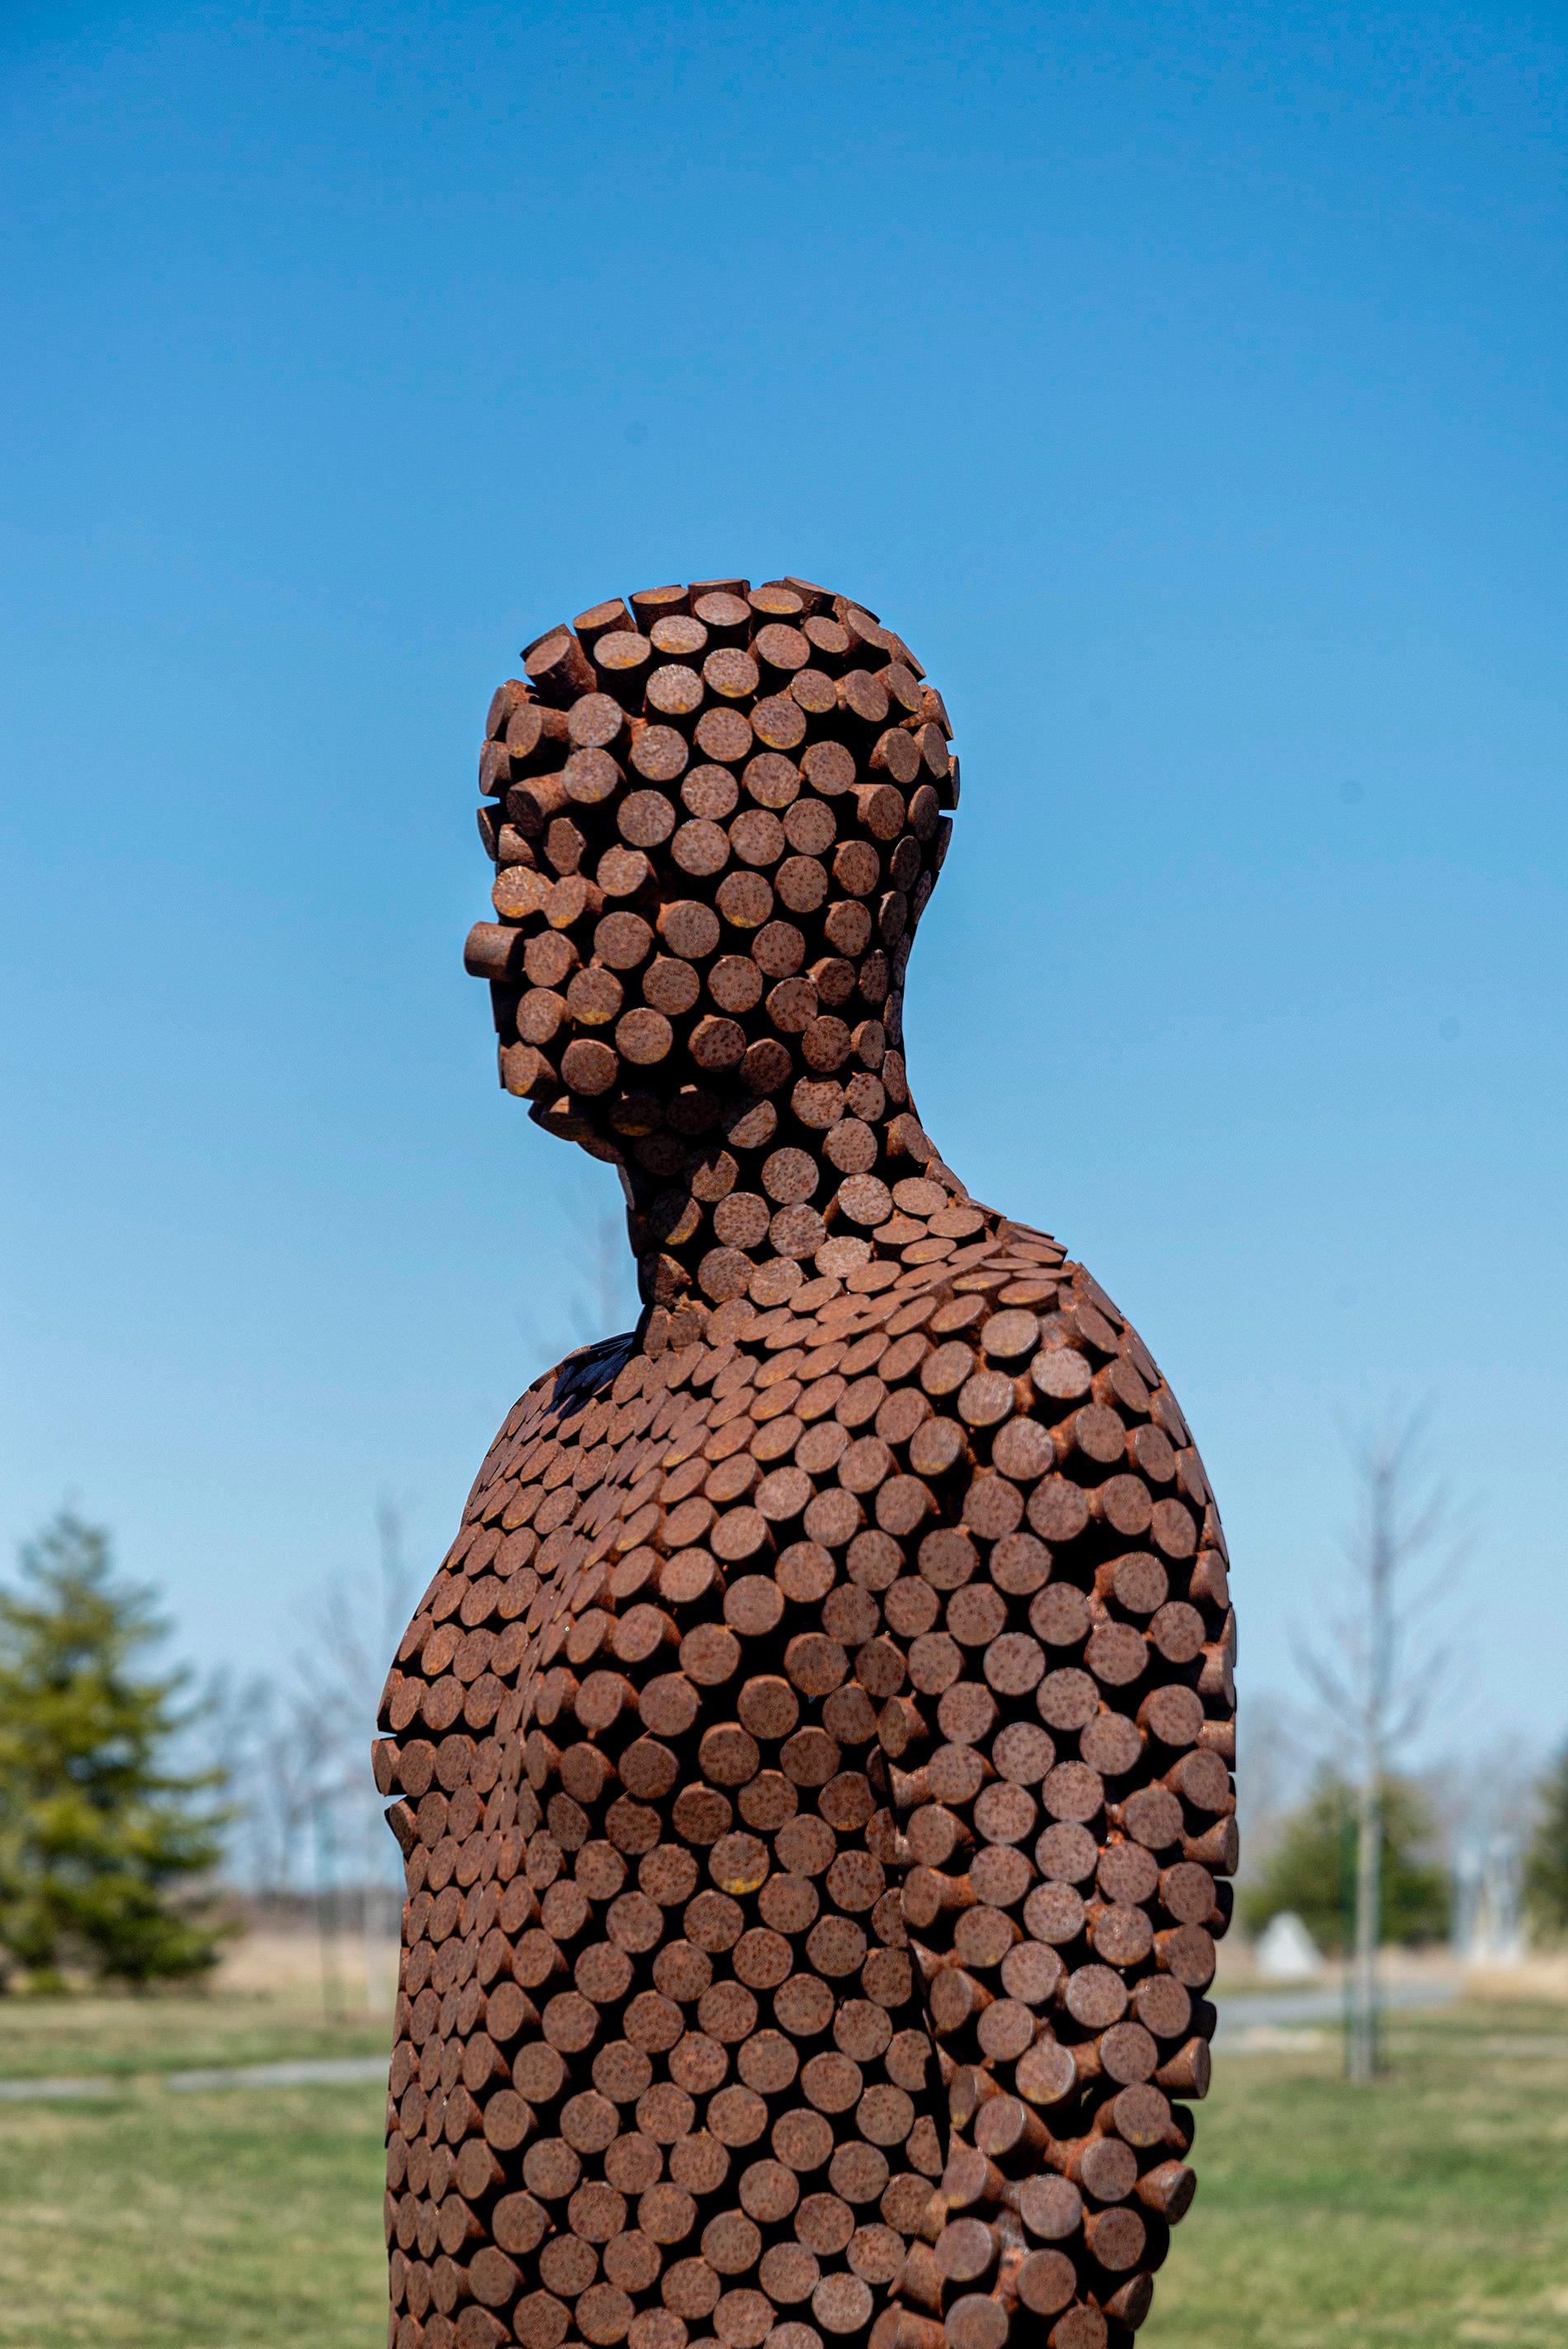 Sentinel - large, rusted, male figure, Corten steel outdoor sculpture - Contemporary Sculpture by Jason Kimes